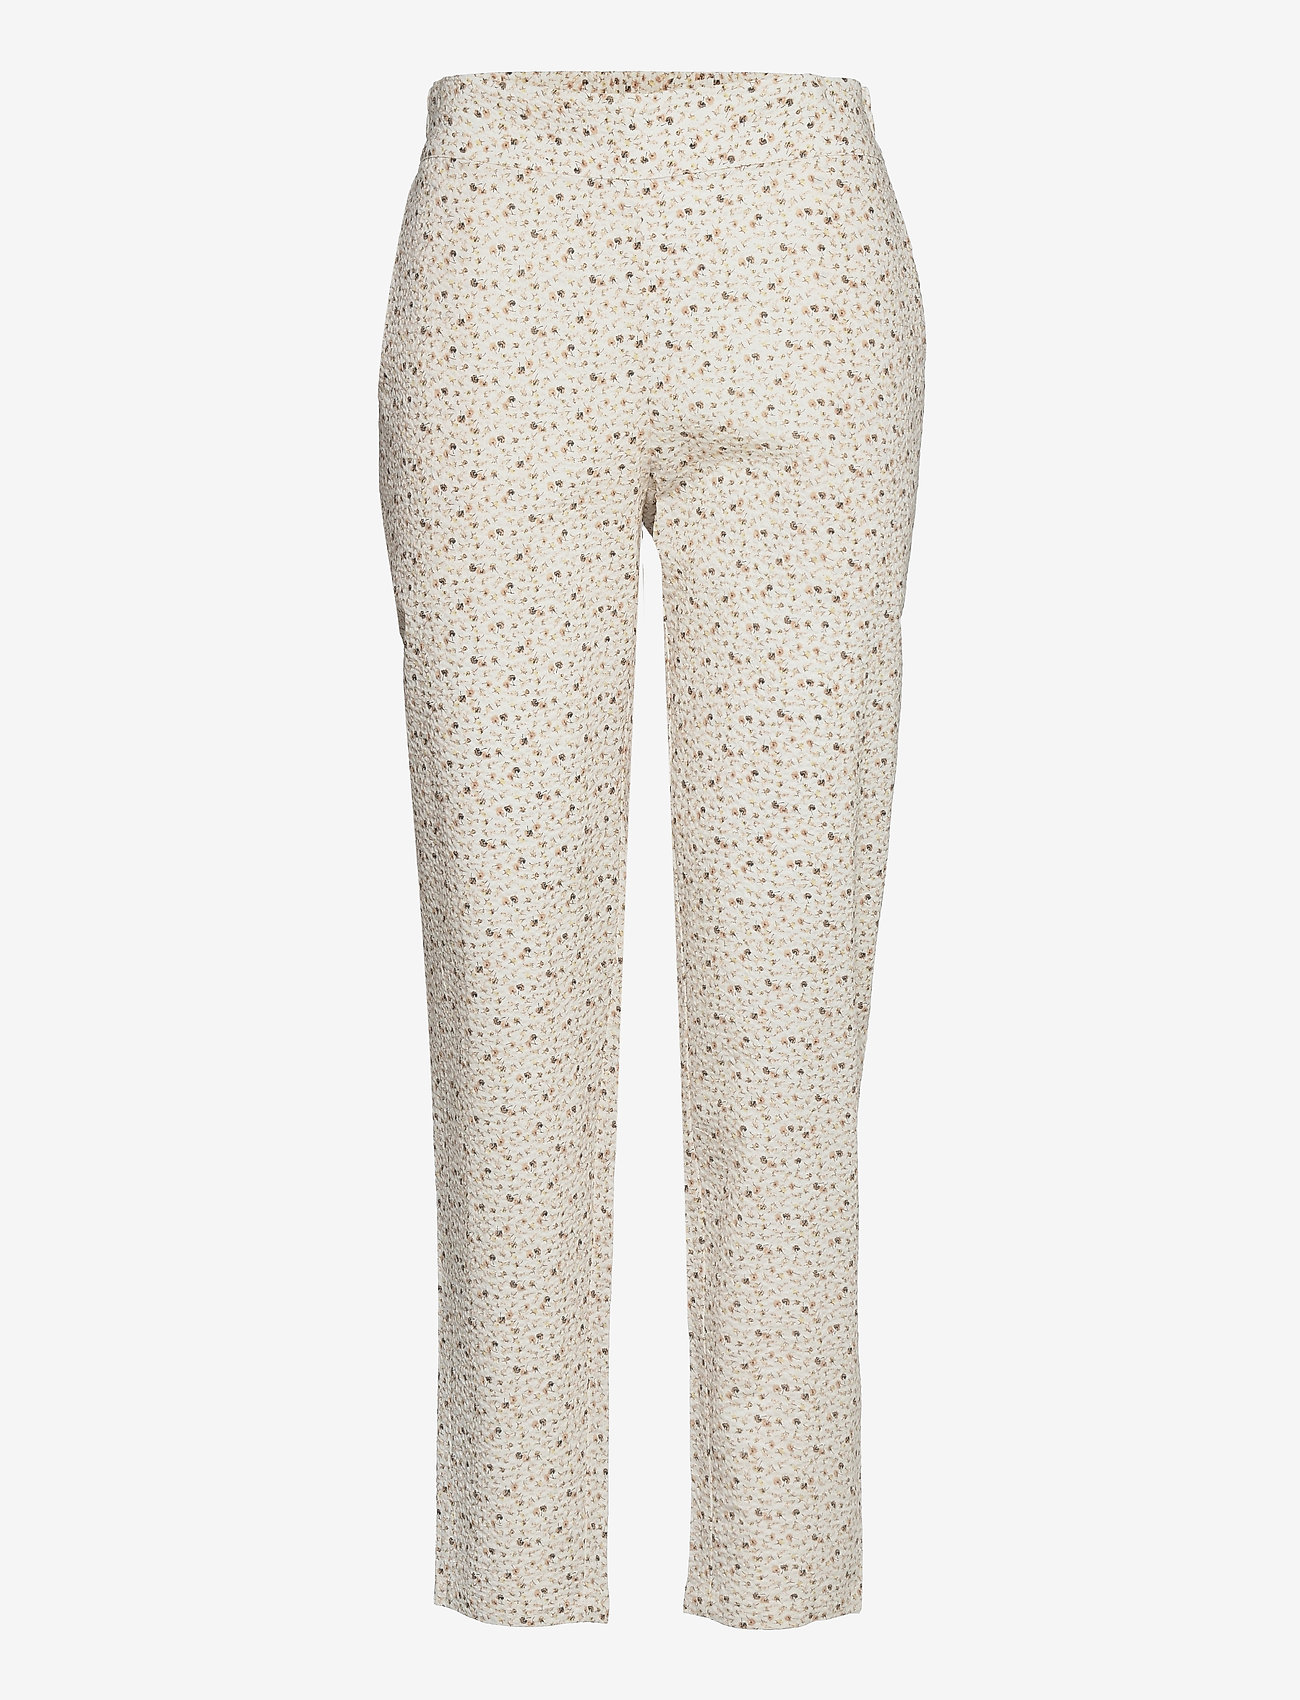 Sofie Schnoor - Trousers - straight leg trousers - creme - 0